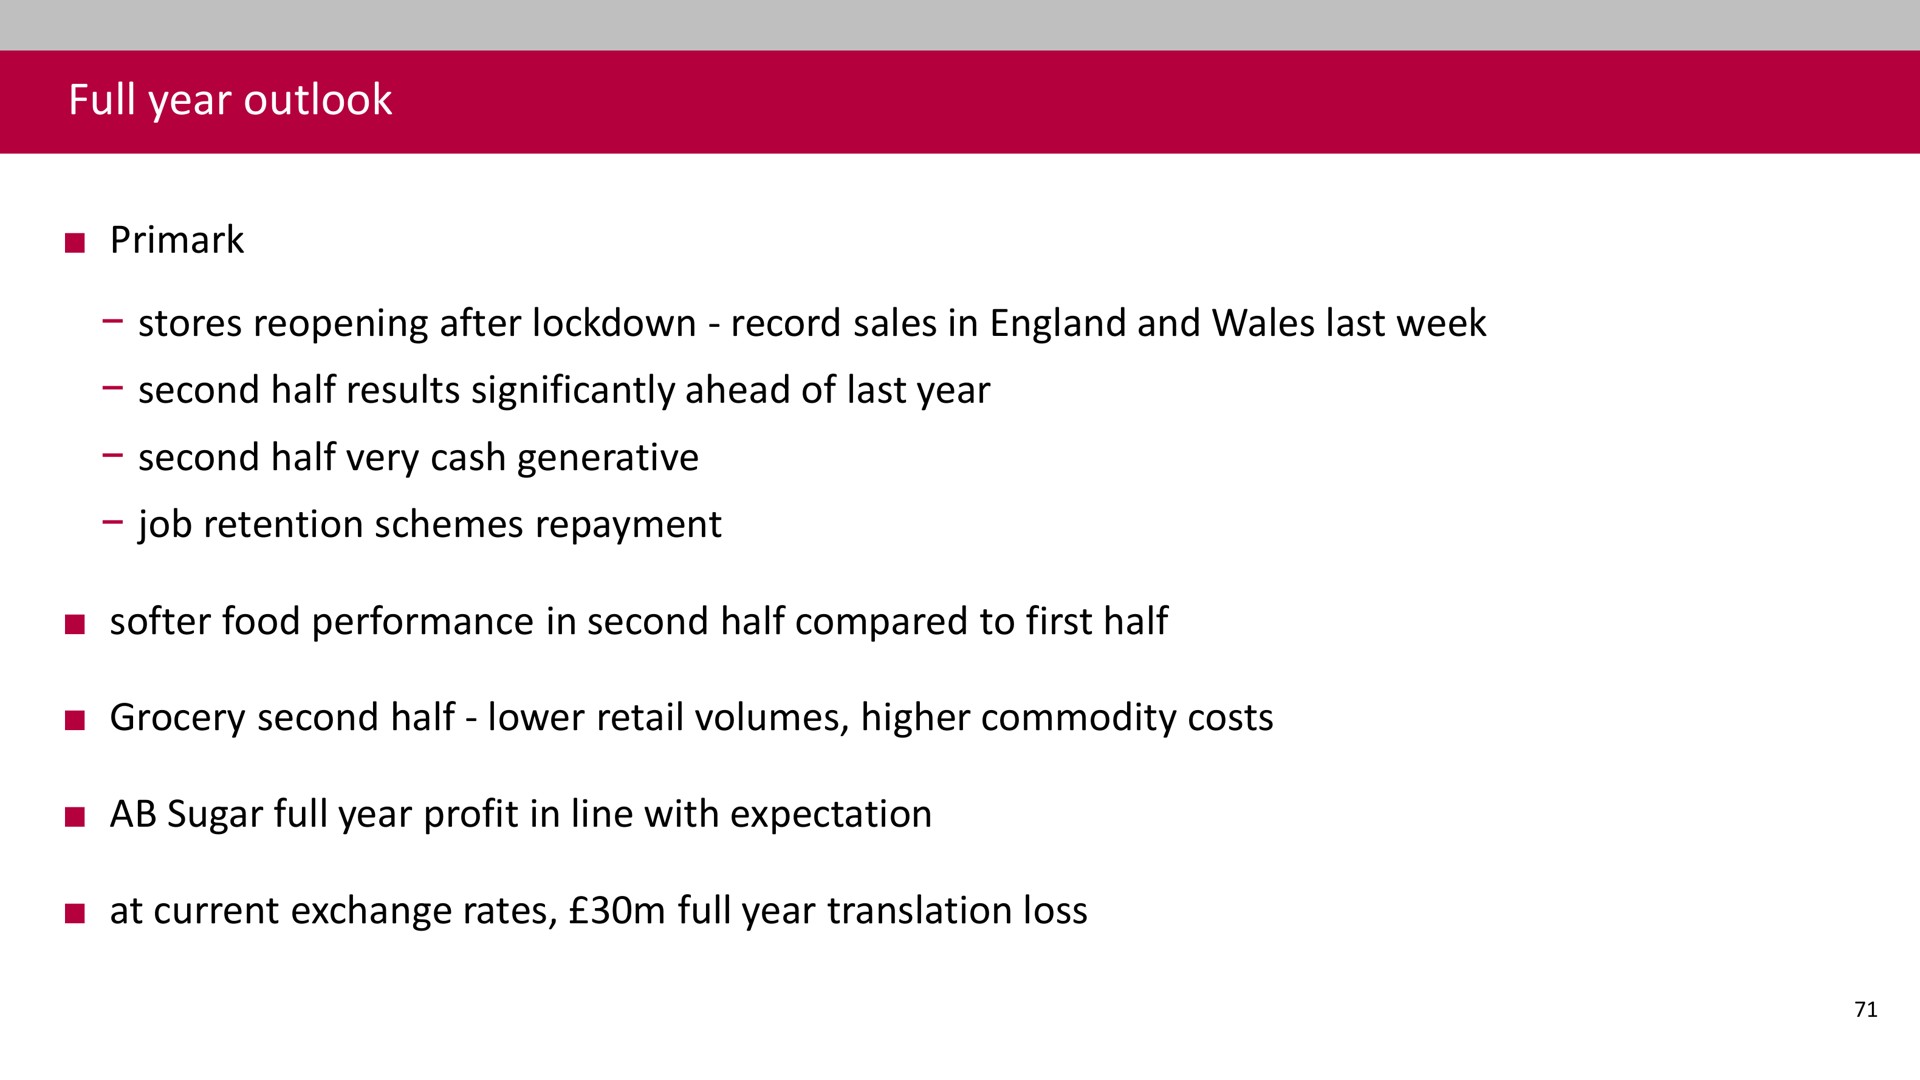 full year outlook stores reopening after record sales in and wales last week second half results significantly ahead of last year second half very cash generative job retention schemes repayment food performance in second half compared to first half grocery second half lower retail volumes higher commodity costs sugar full year profit in line with expectation at current exchange rates full year translation loss | Associated British Foods